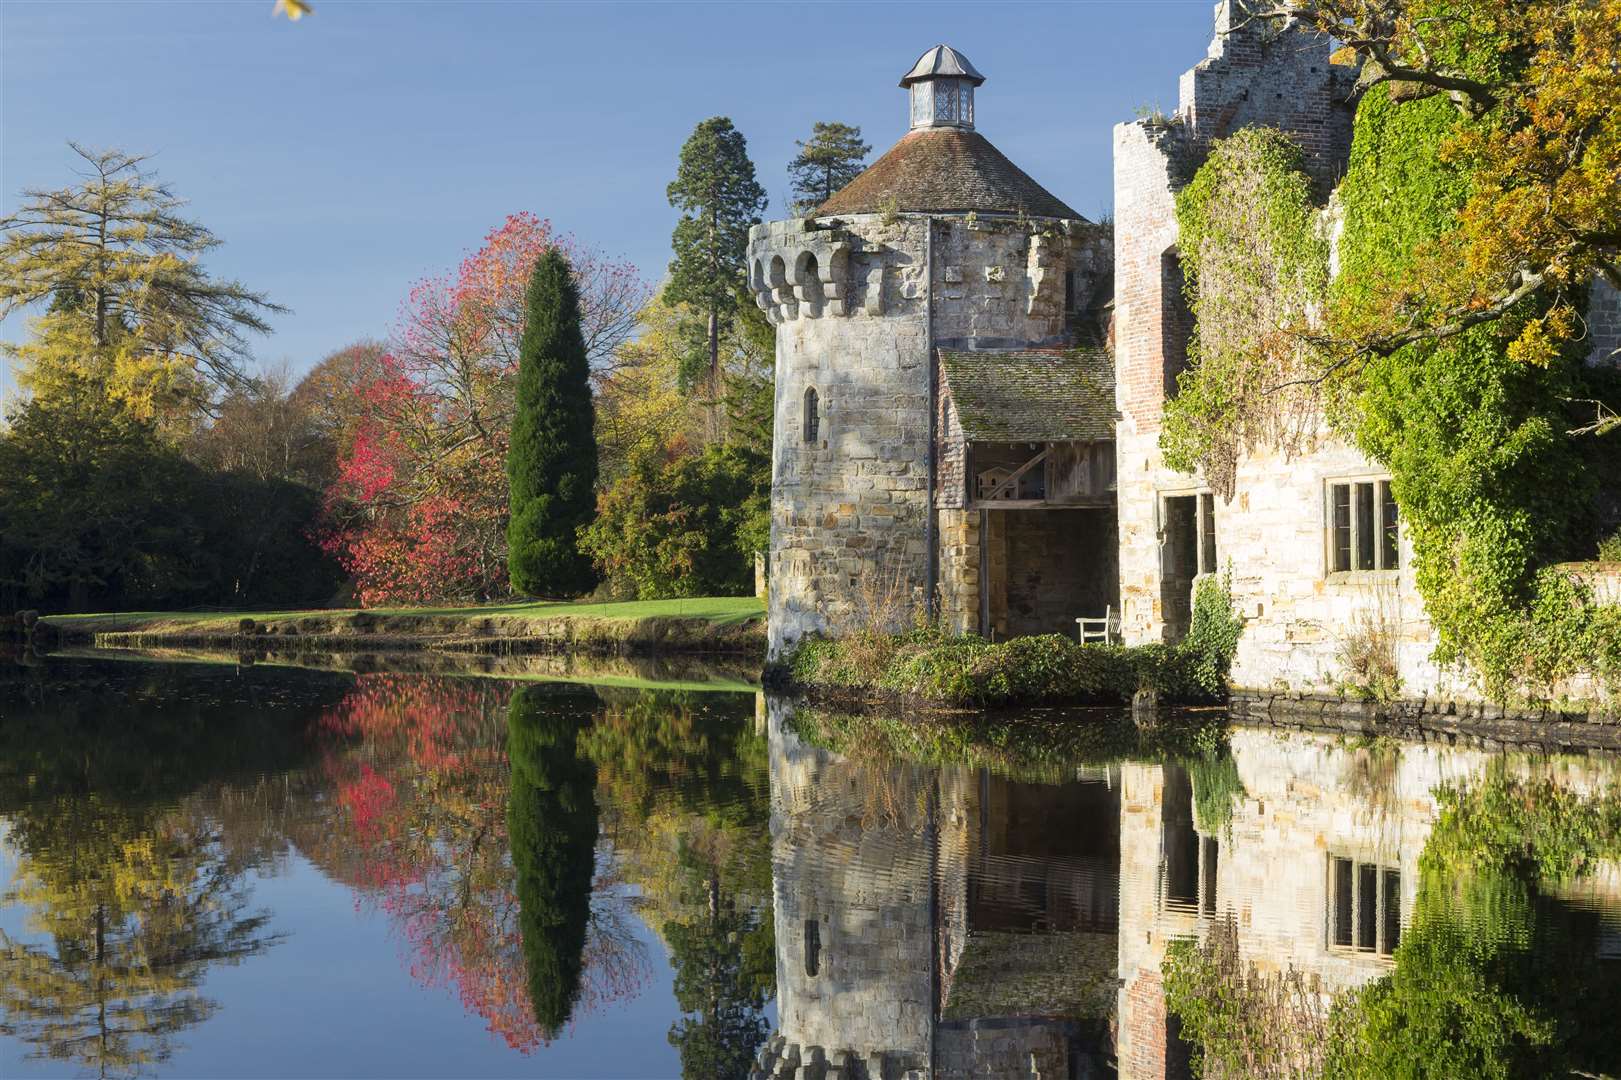 The autumn at Scotney Castle Picture: National Trust/John Miller